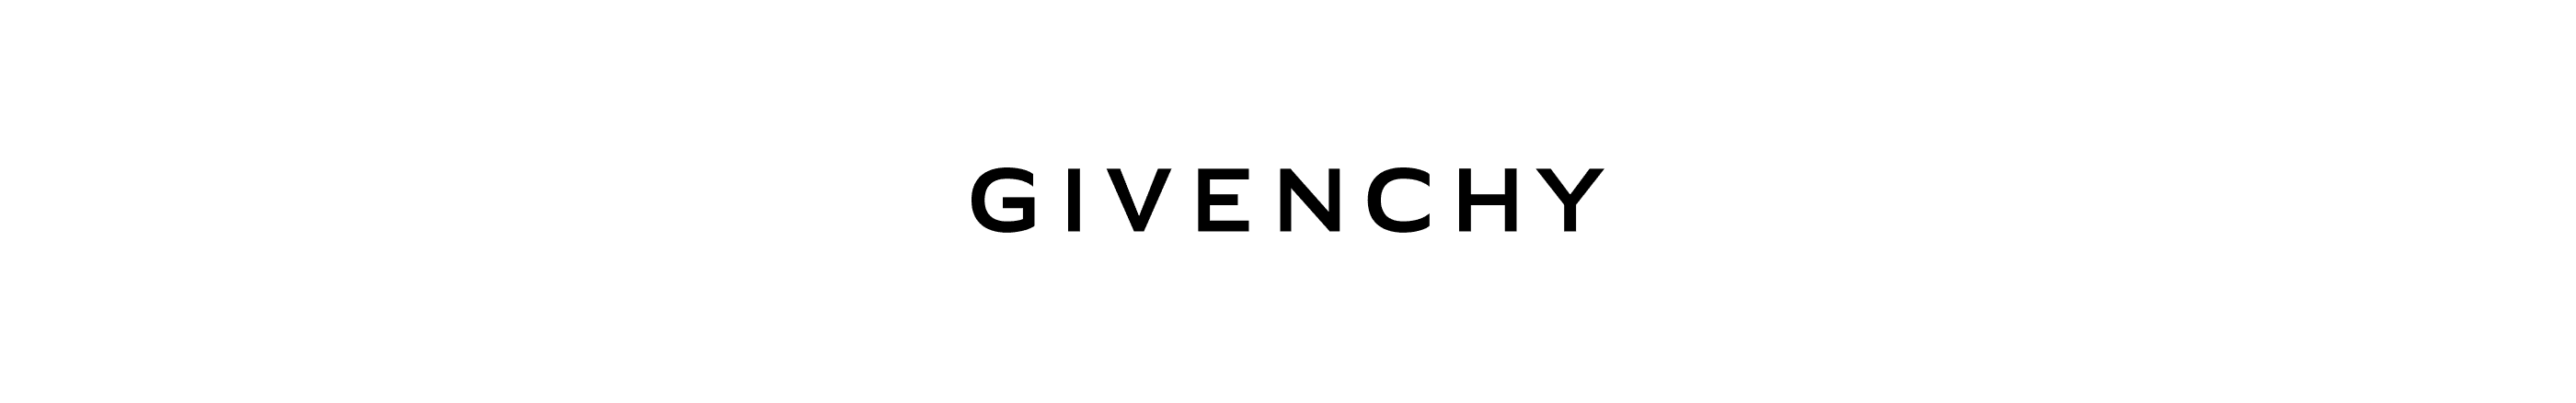 givenchyofficial banner